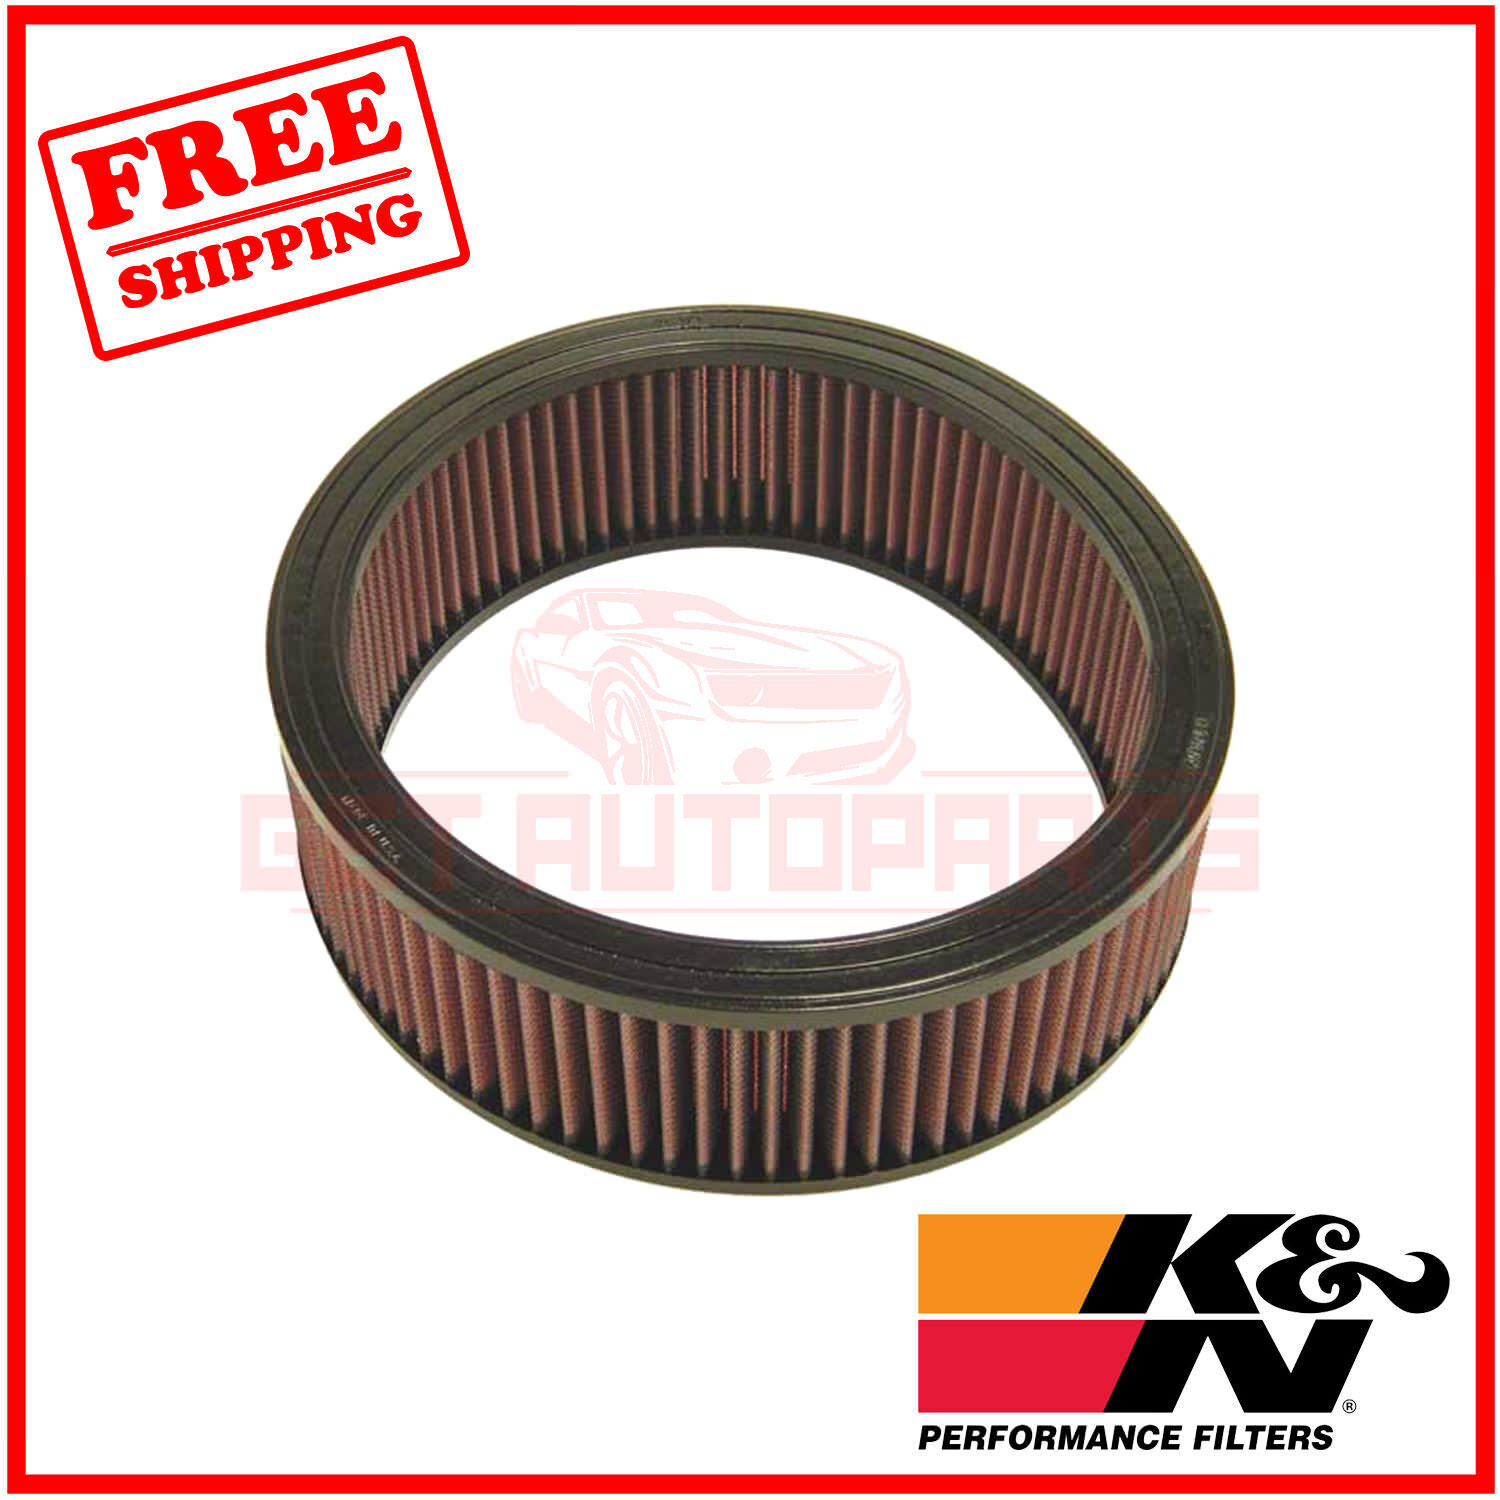 K&N Replacement Air Filter for Dodge D100 1975-1979